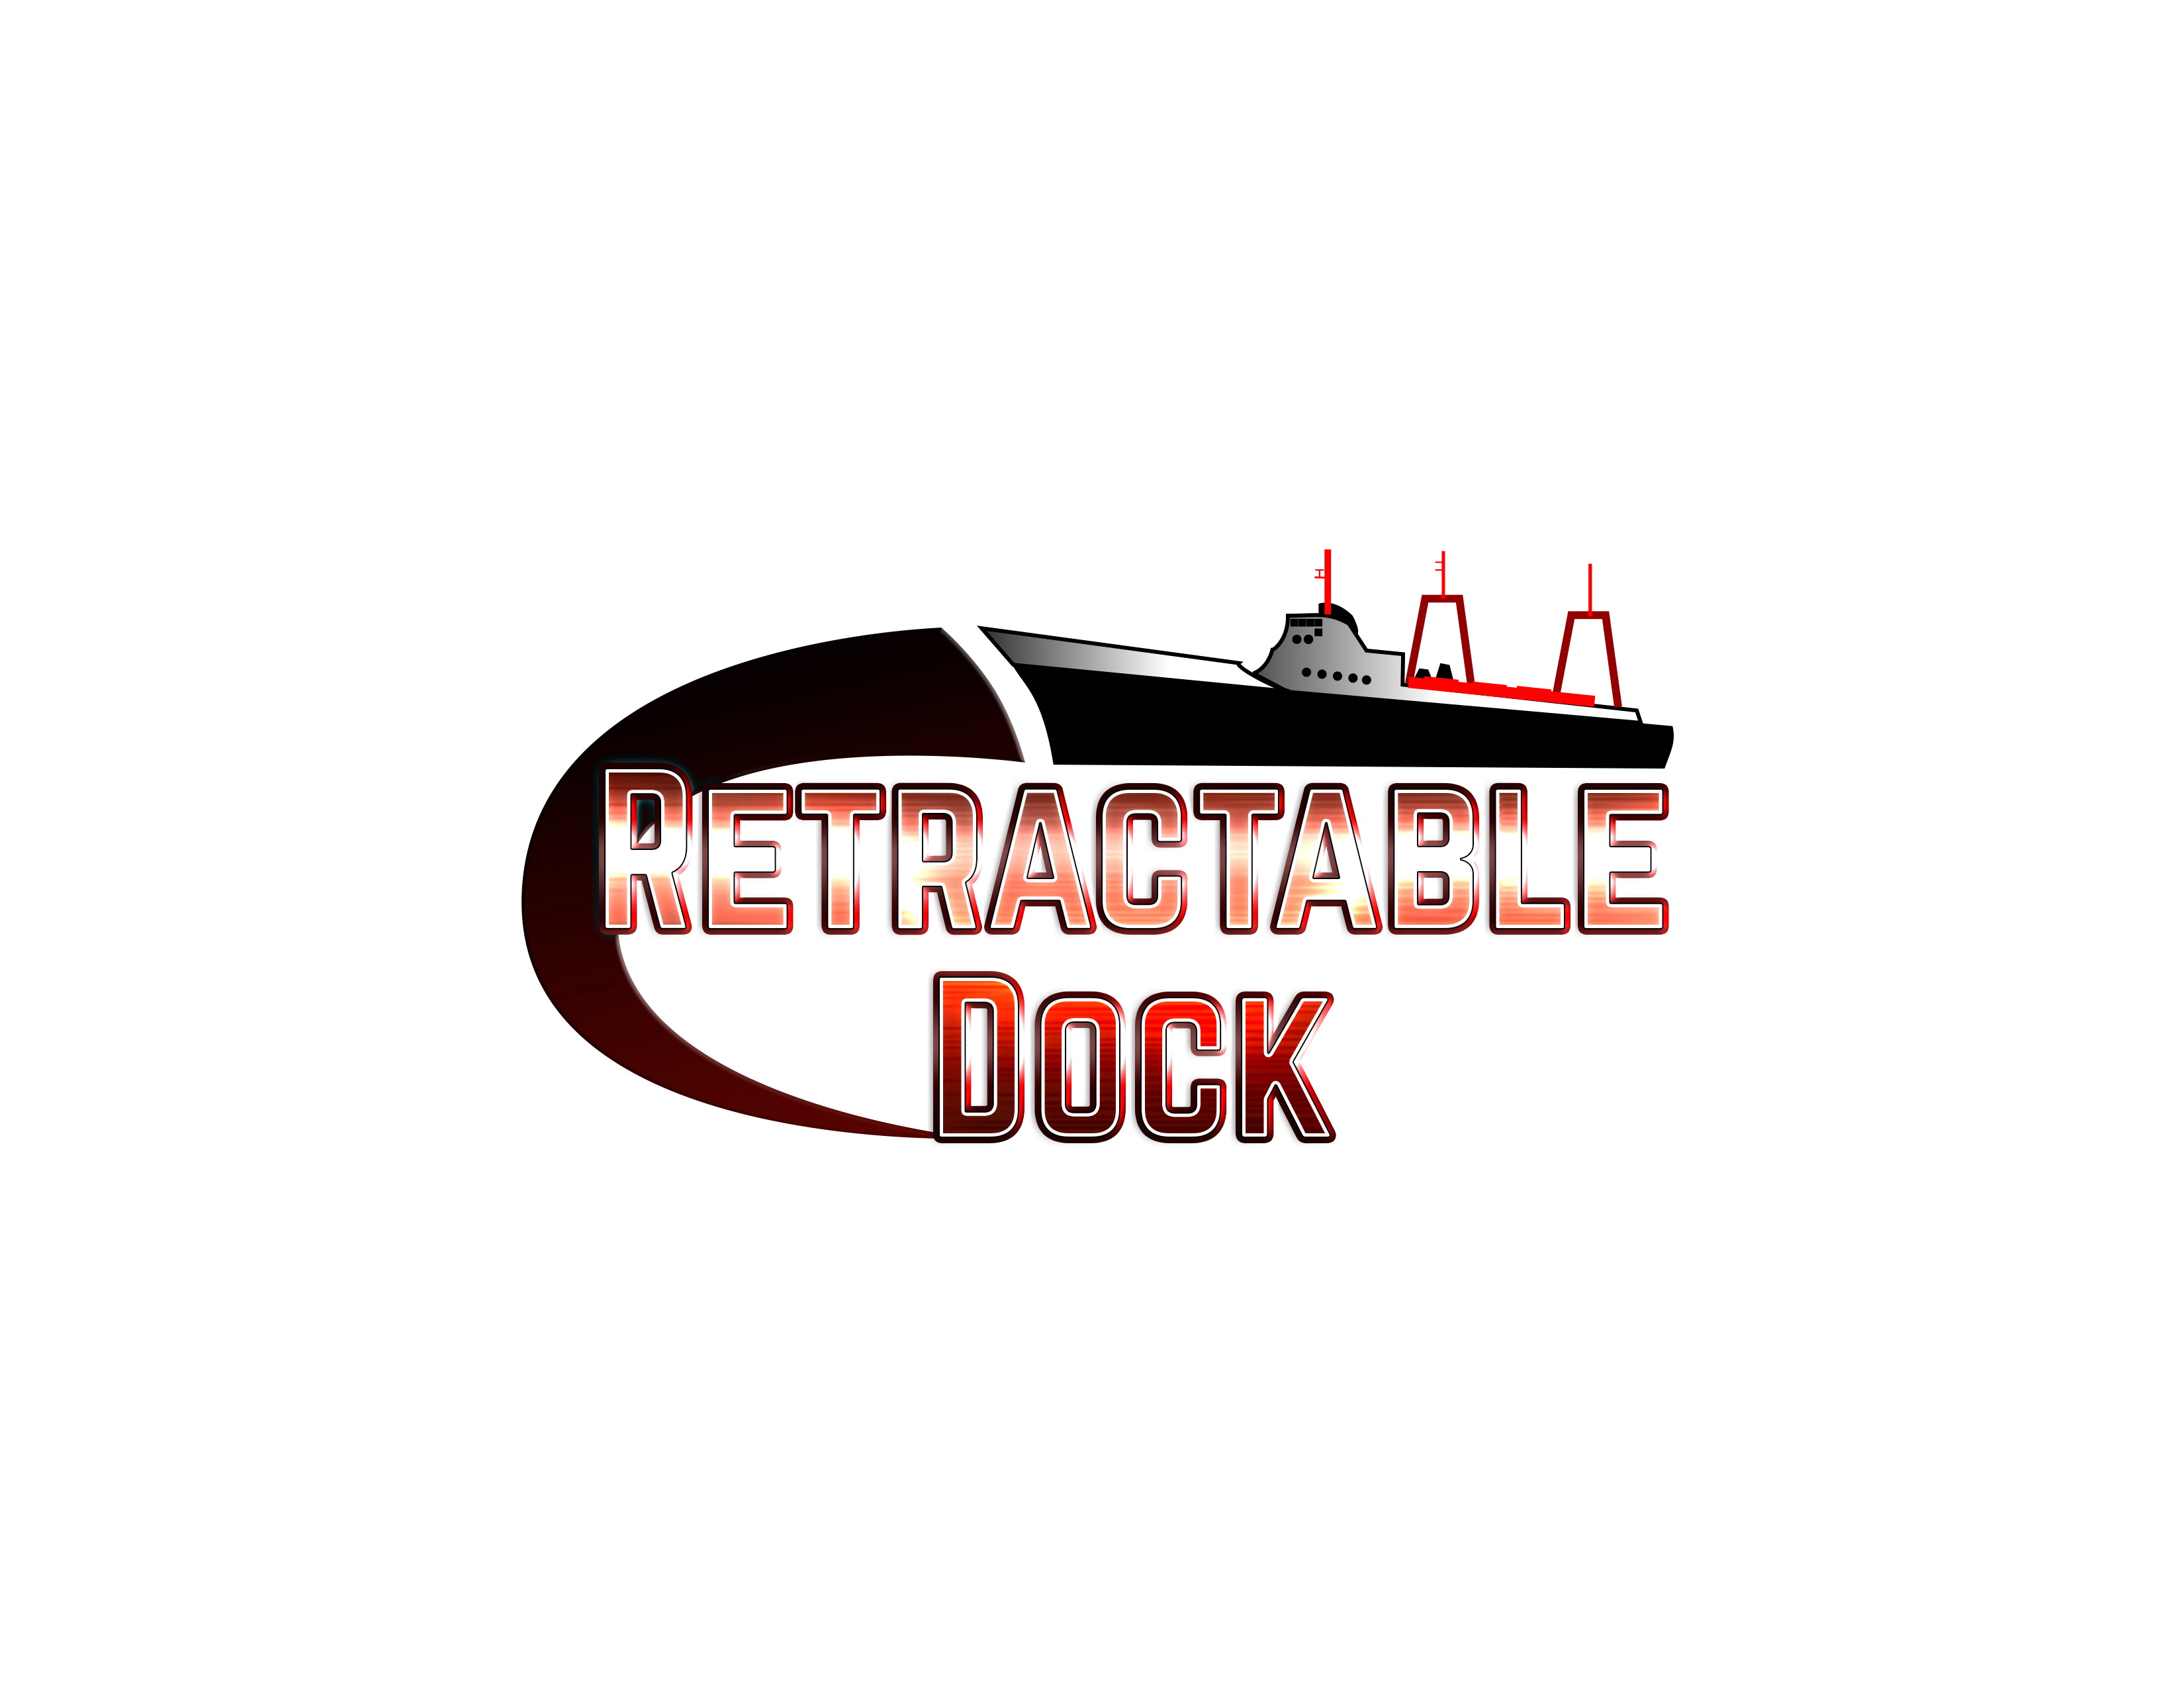 Retractable Dock, a technological invention designed to provide a more efficient and eco-friendly dock for the maritime industry